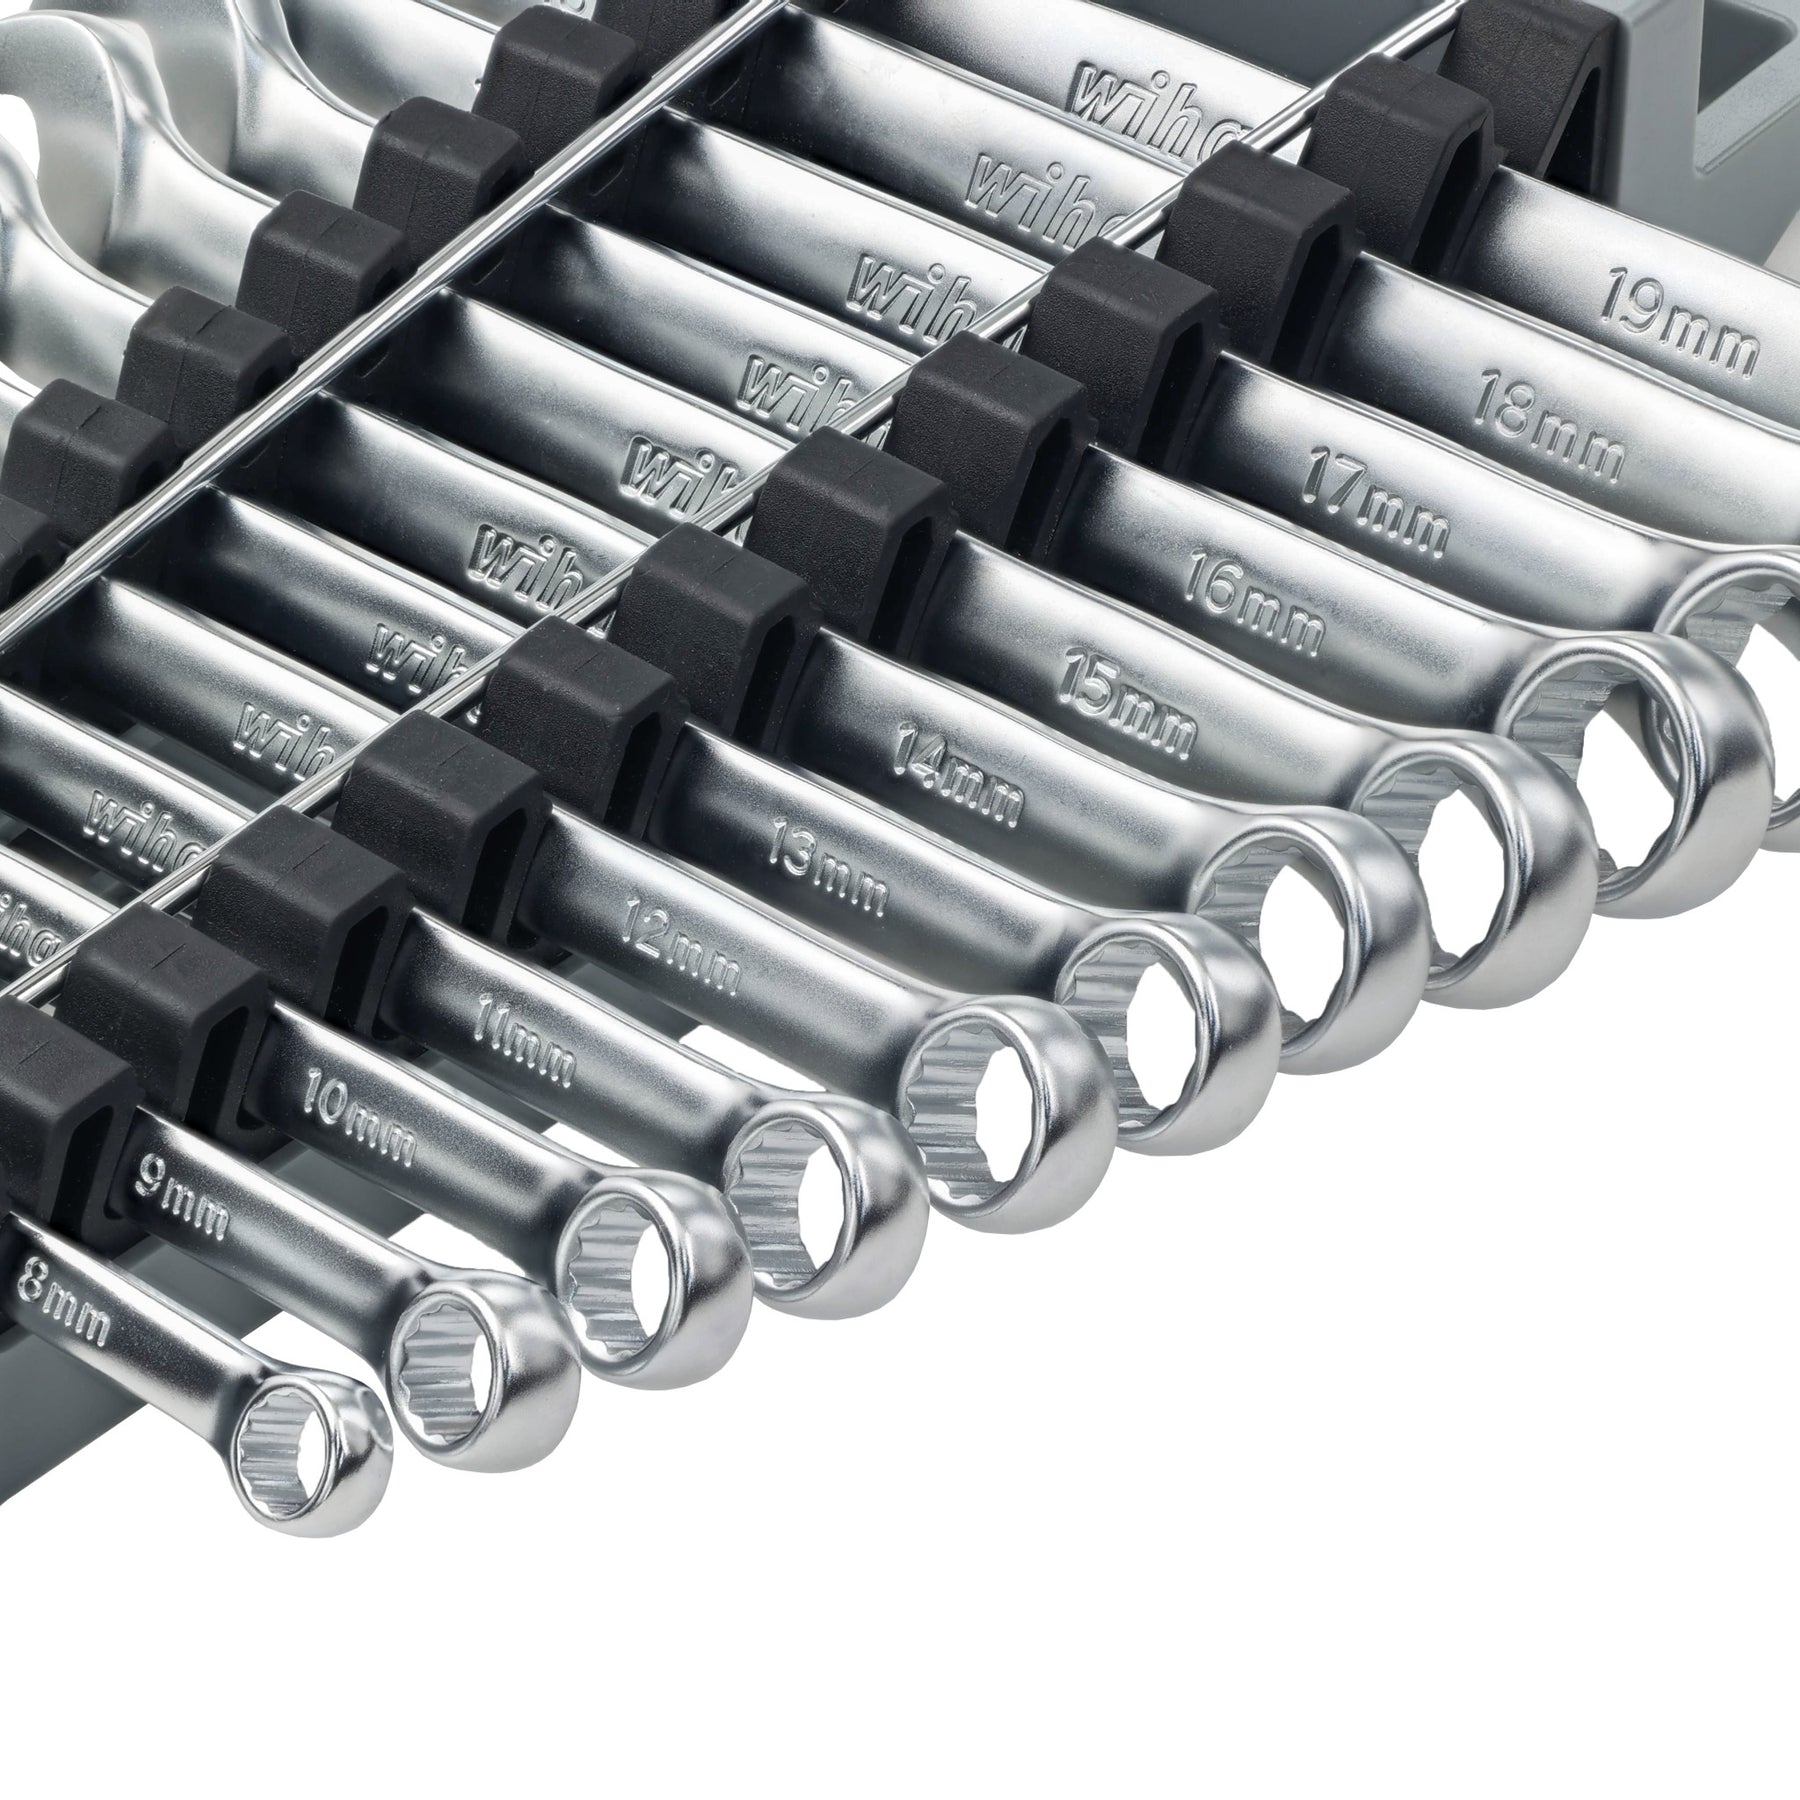 12 Piece Combination Wrench Set - Metric